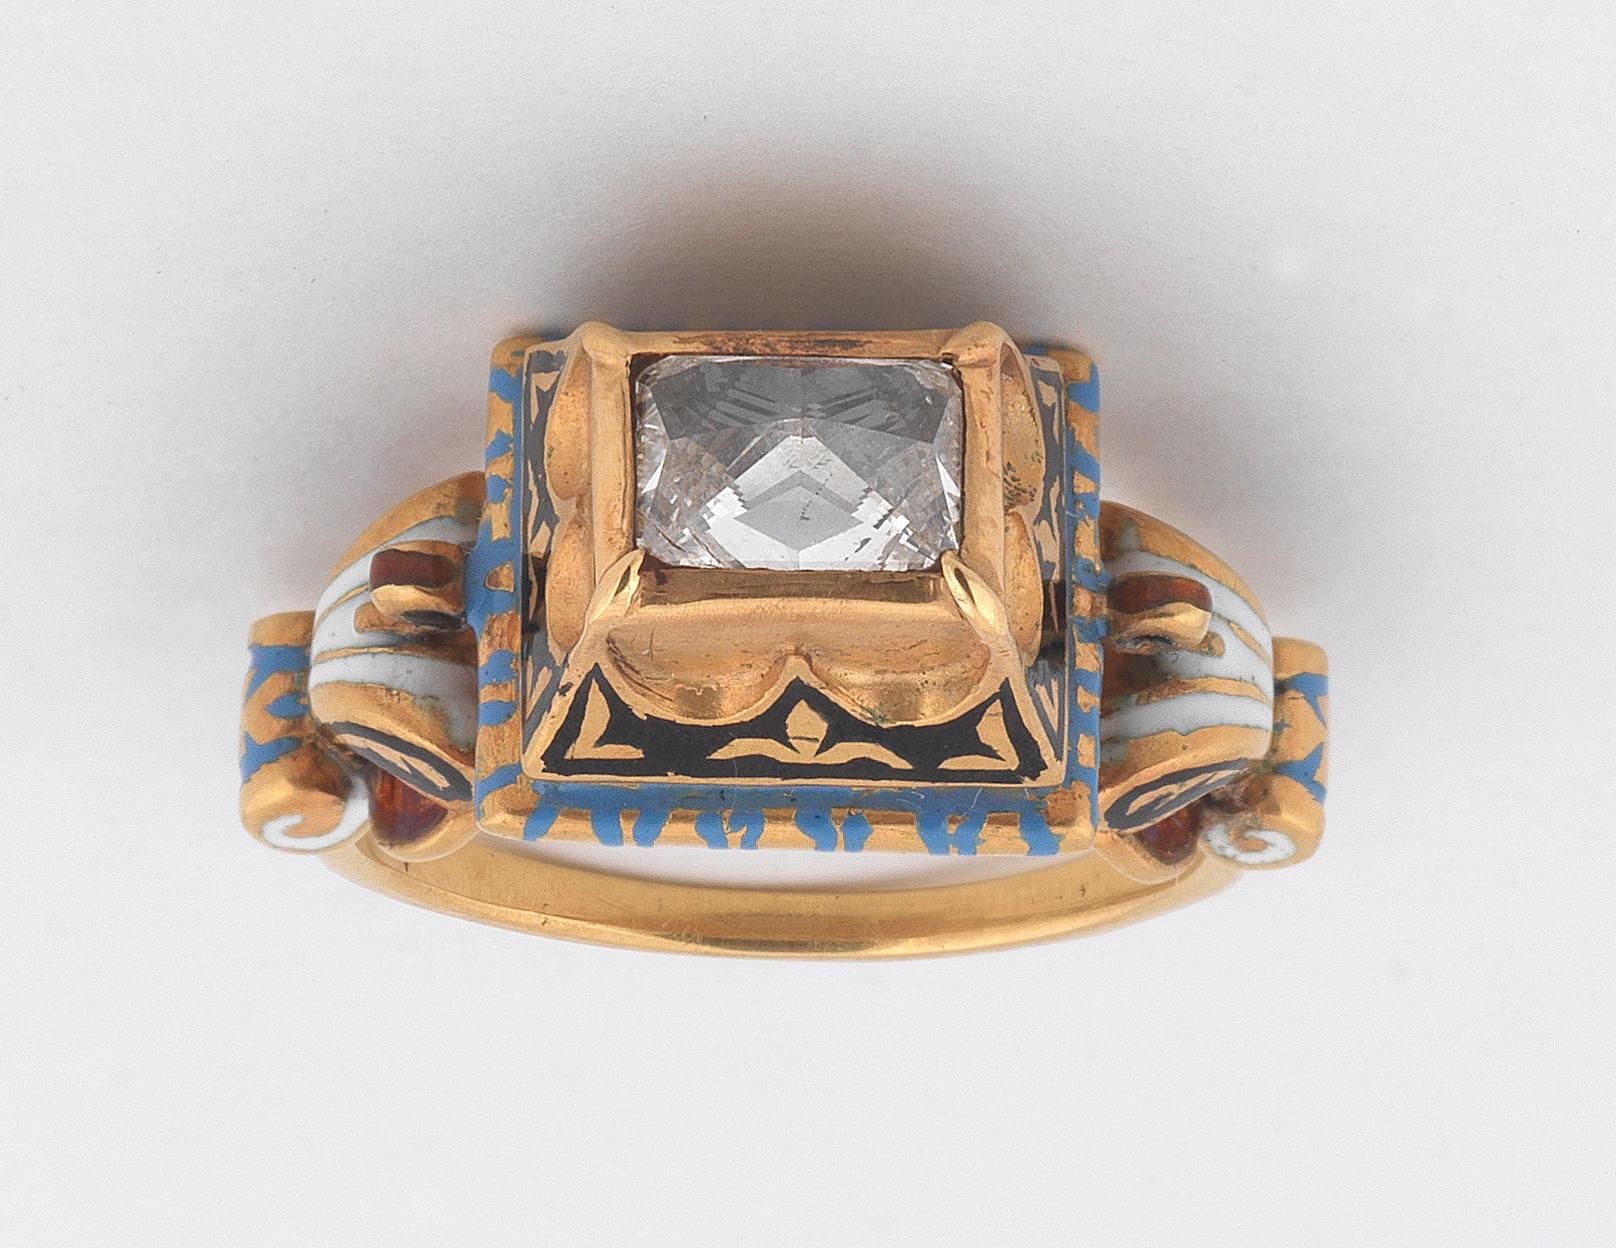 A beautiful Point cut Diamond of about 1ct mounted on a 22kt gold Renaissance period ring with squared shapes and decorations typical of the period, the decorations are in enamels of several colors: white, blue, red and black, in excellent condition